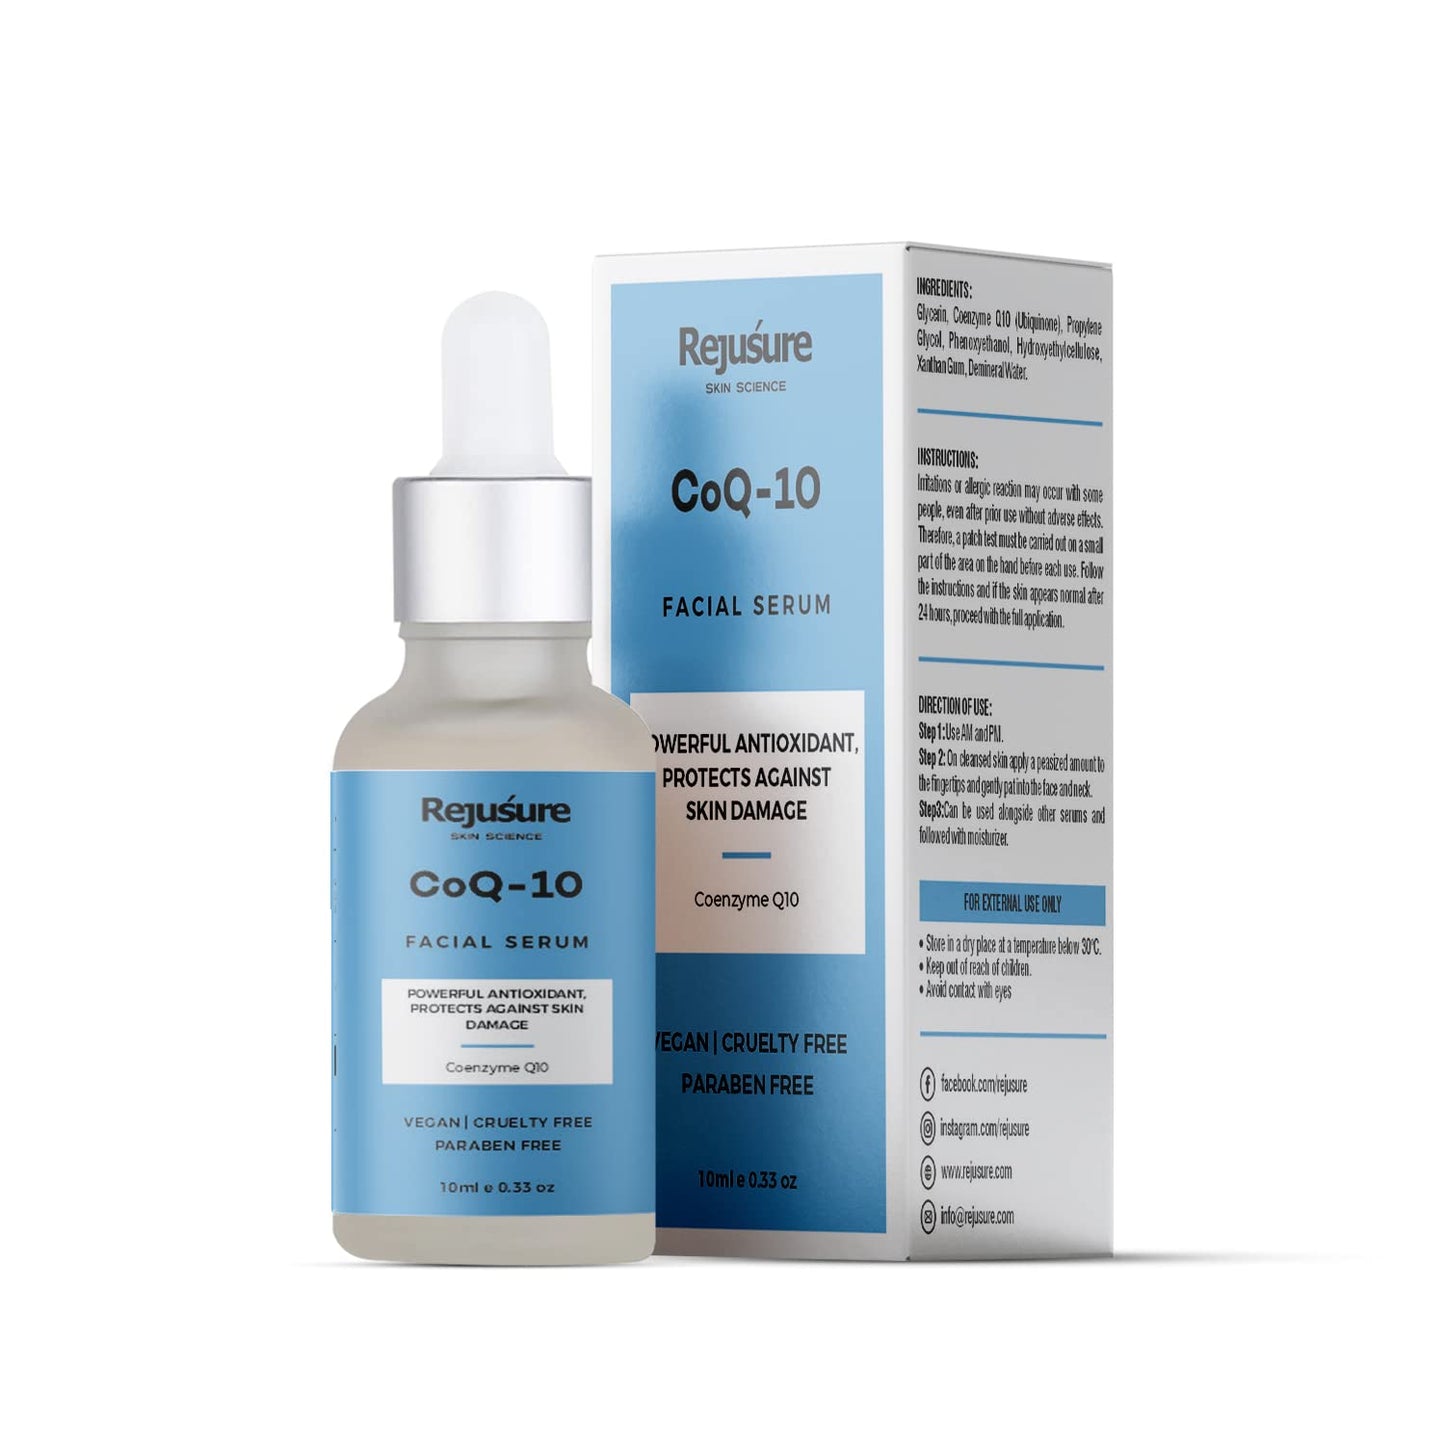 Rejusure Coq -10 Face Serum Powerful Antioxidant Protects Against Skin Damage For Men  Women  Cruelty Free  Dermatologist Tested  10ml